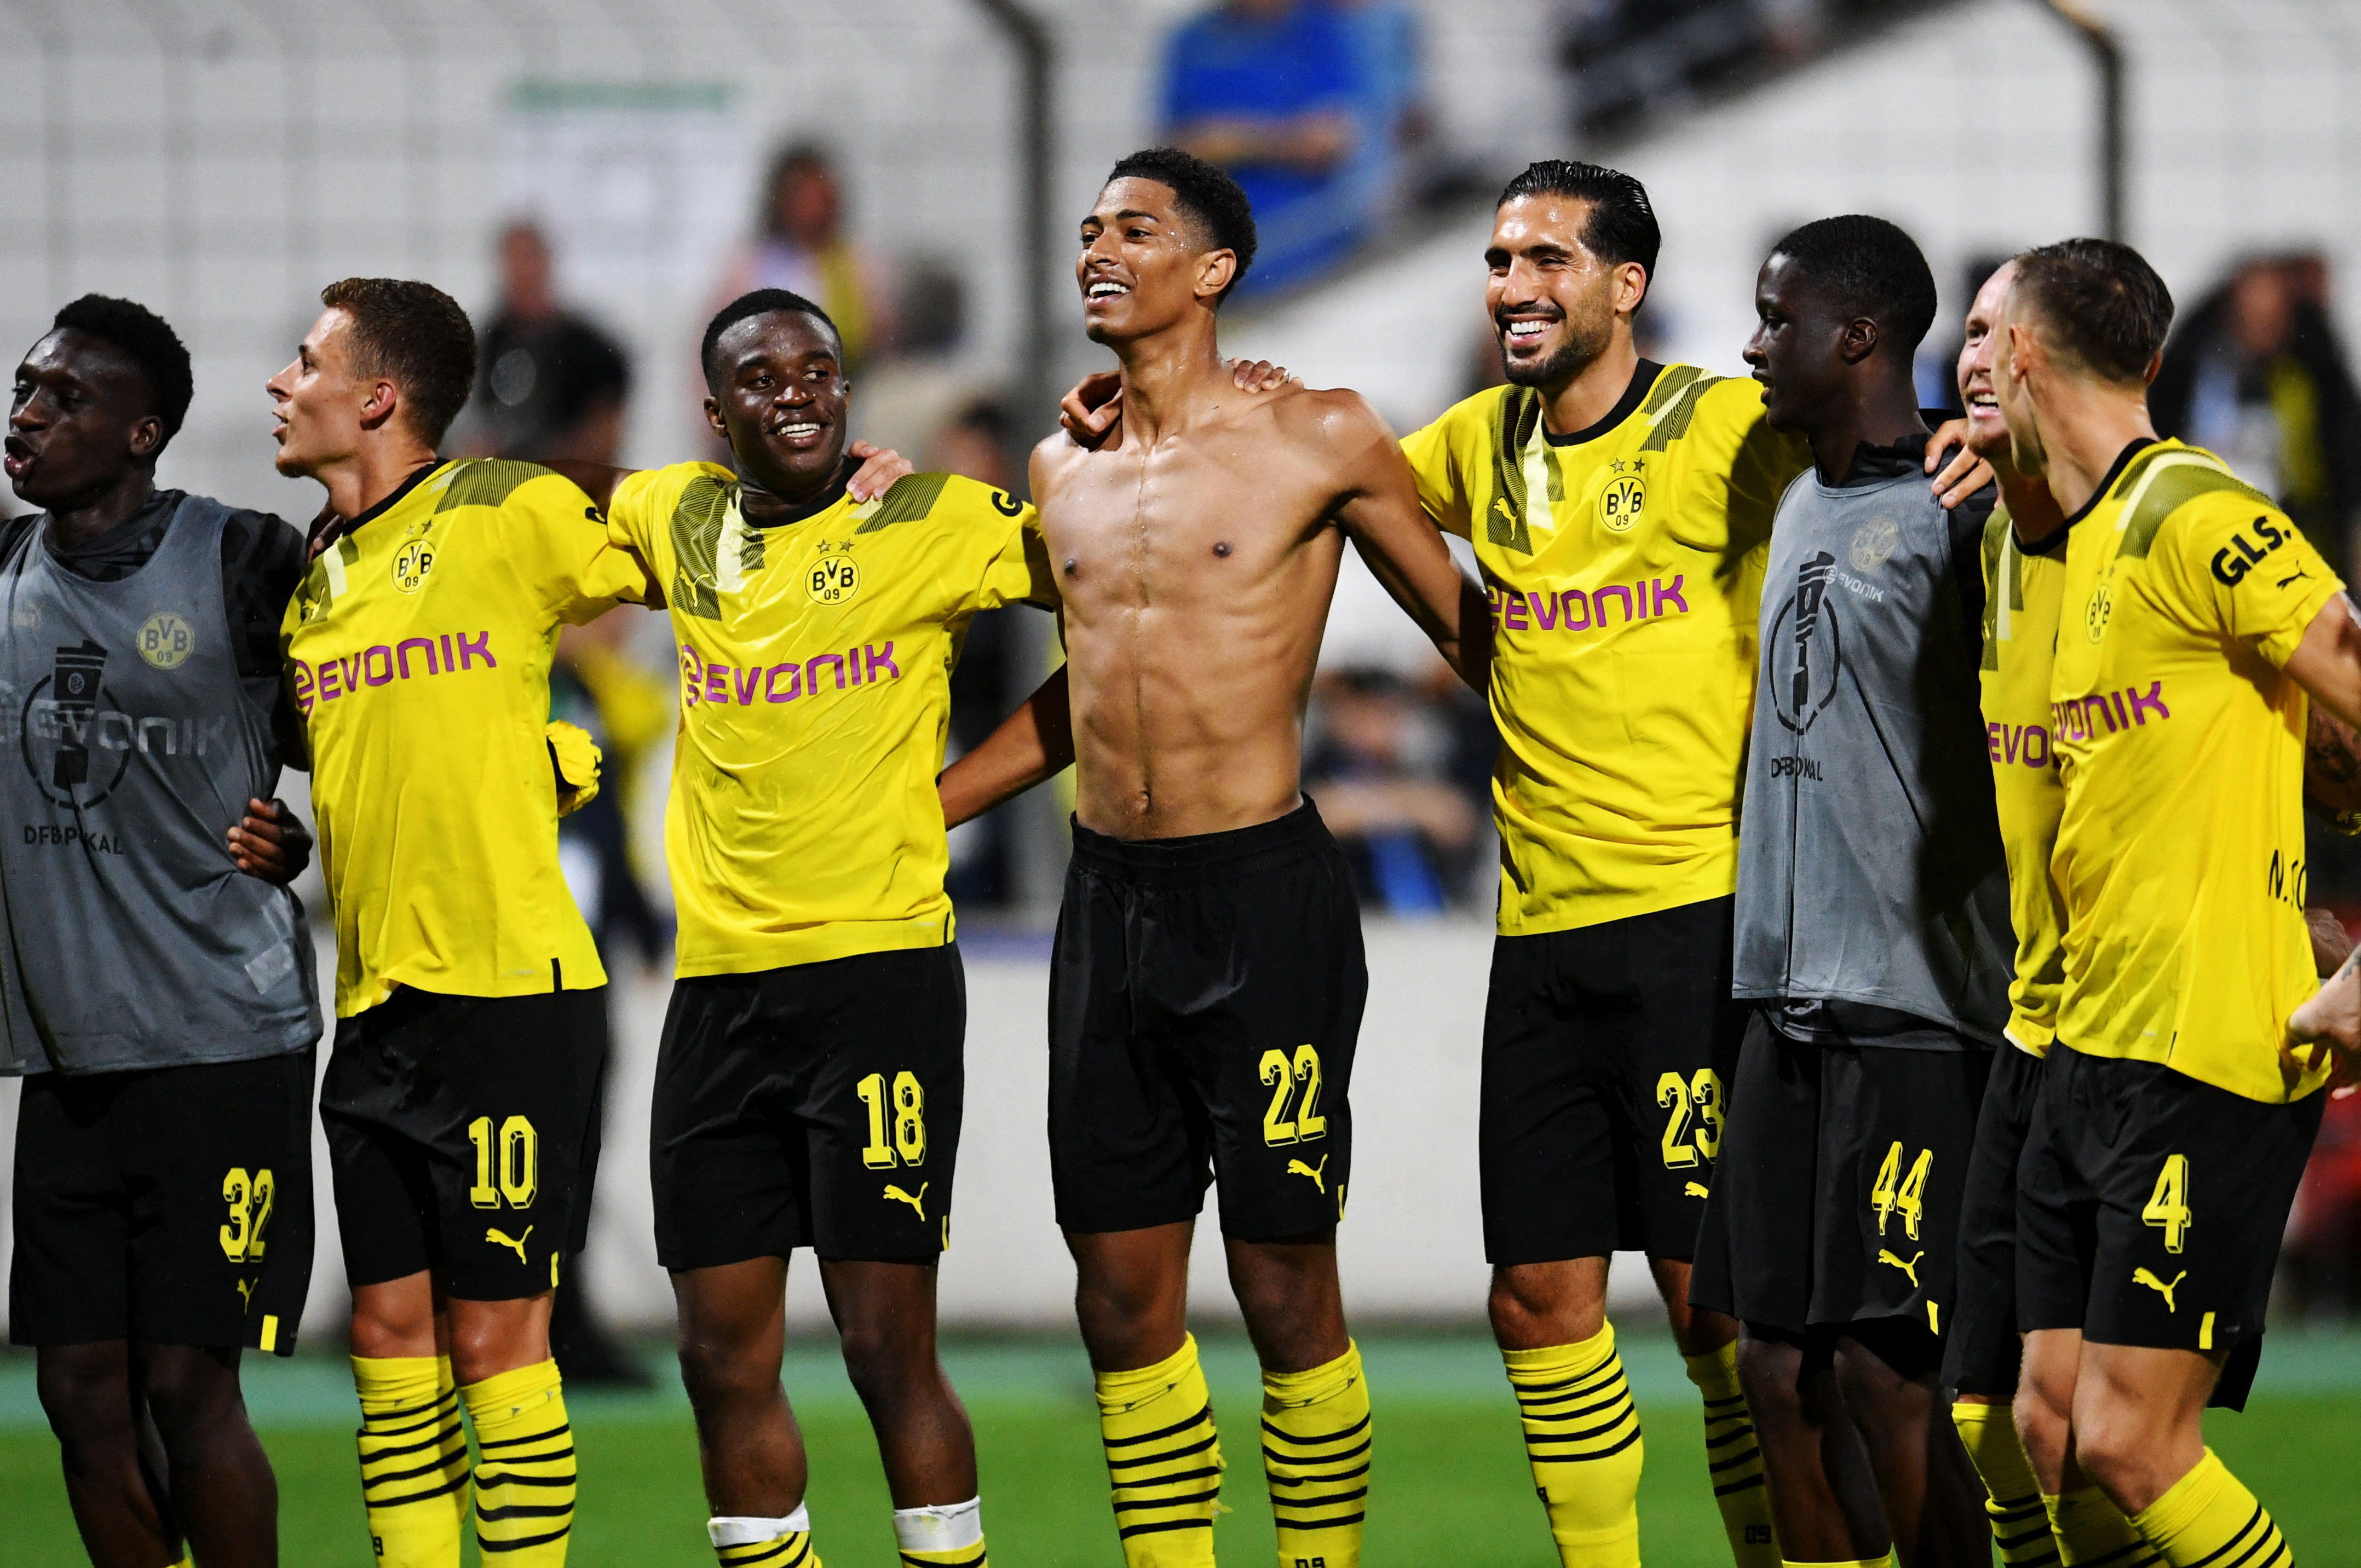 Dominant Dortmund kick off season with German Cup win over 1860 Munich - Reuters